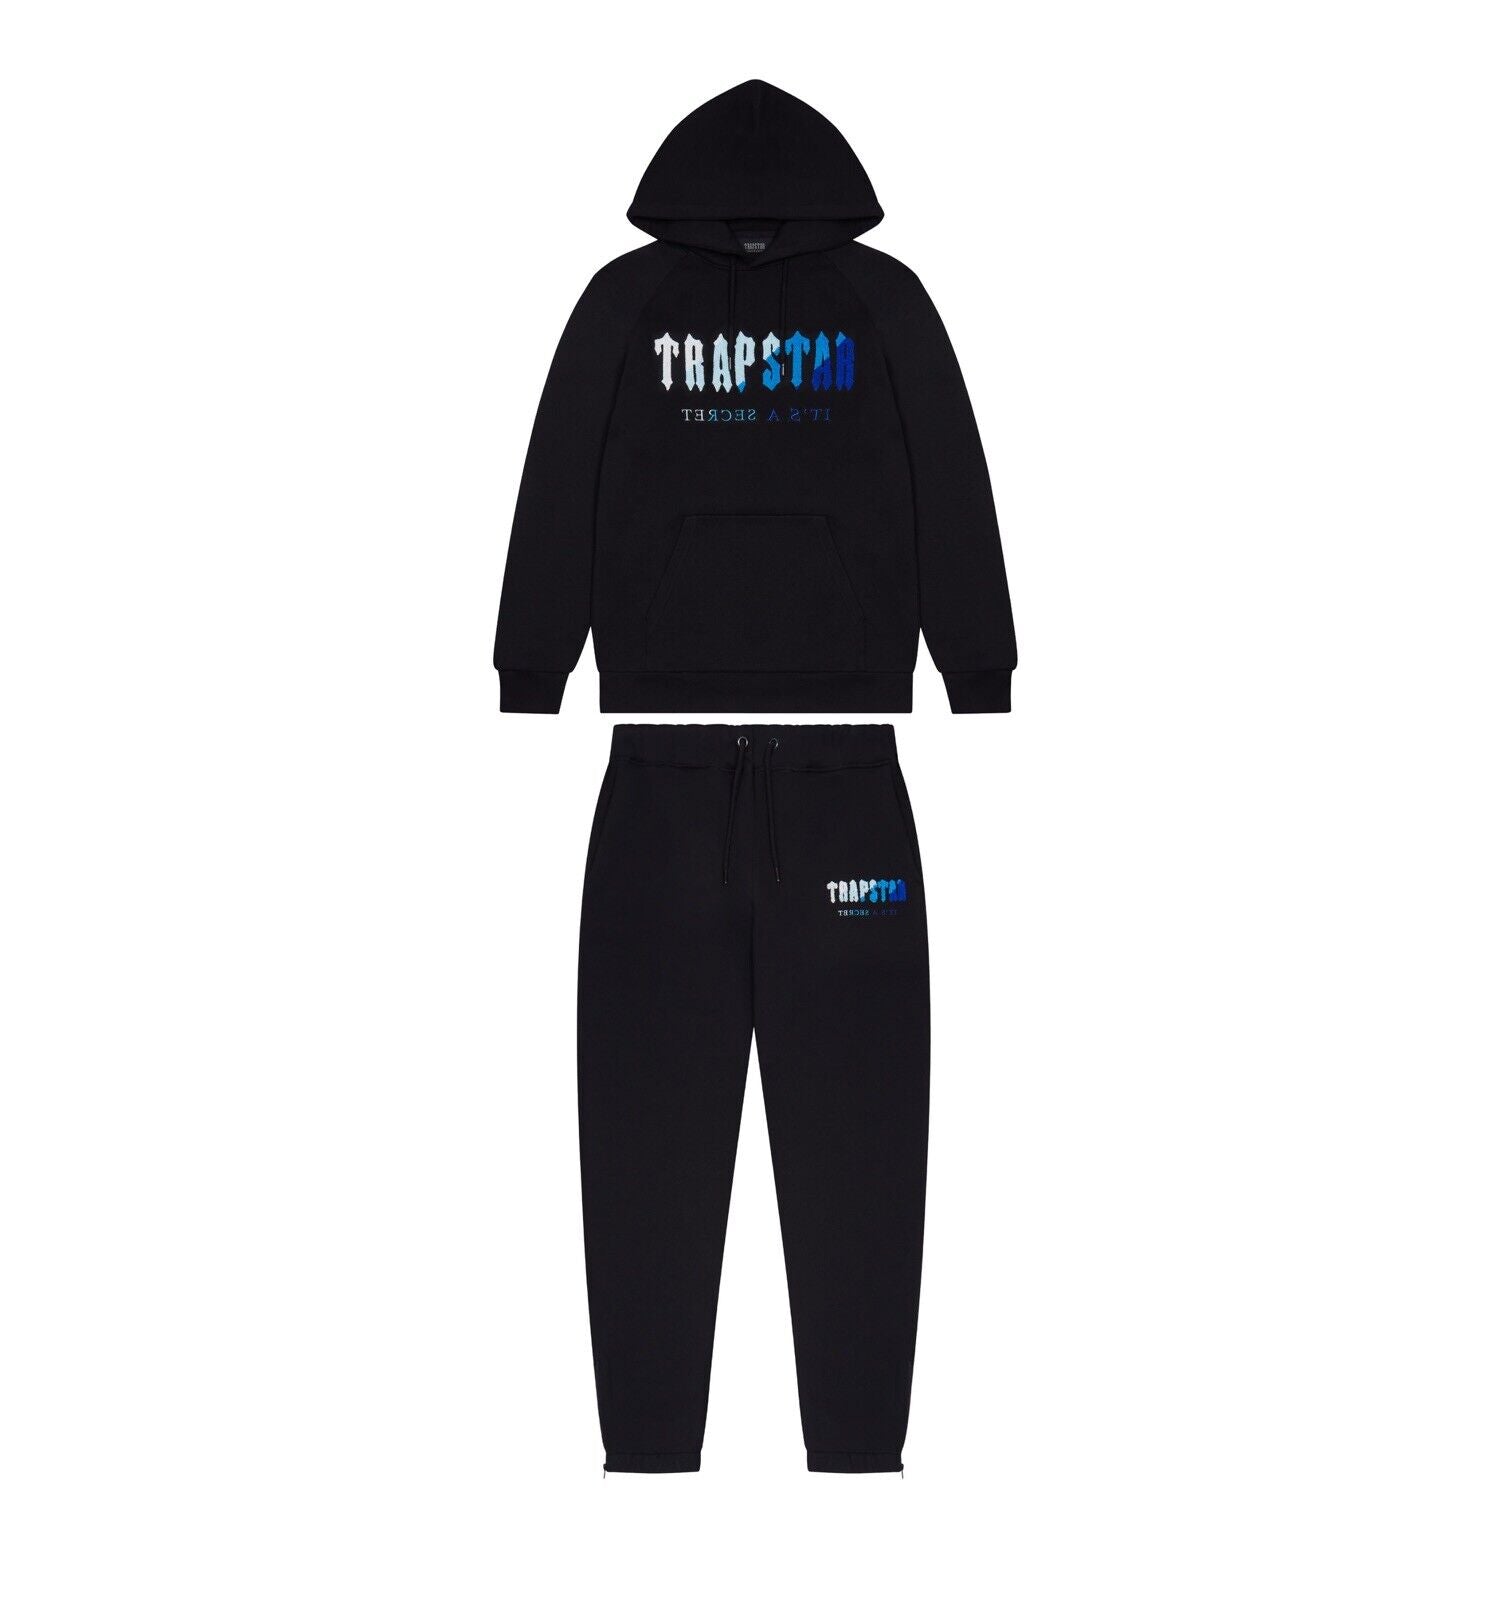 TRAPSTAR CHENILLE DECODED HOODED TRACKSUIT - BLACK ICE FLAVOURS 2.0 EDITION - Hype Locker UK